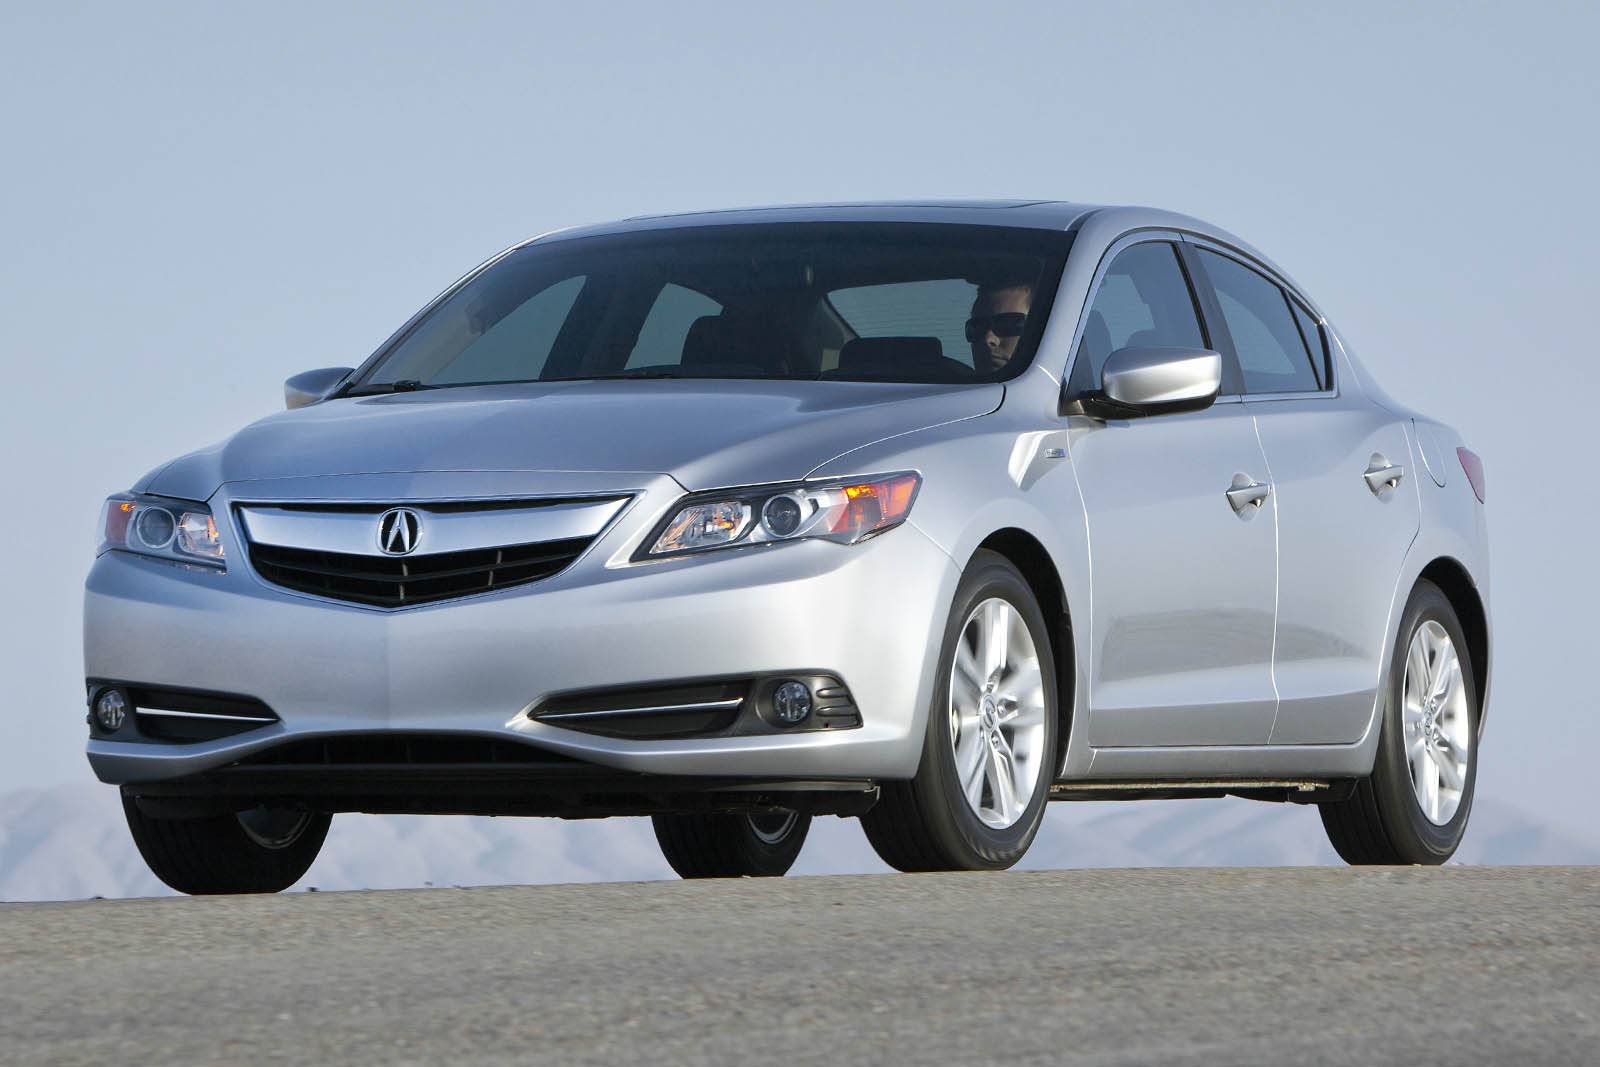 2013 Acura ILX Review & Ratings | Edmunds